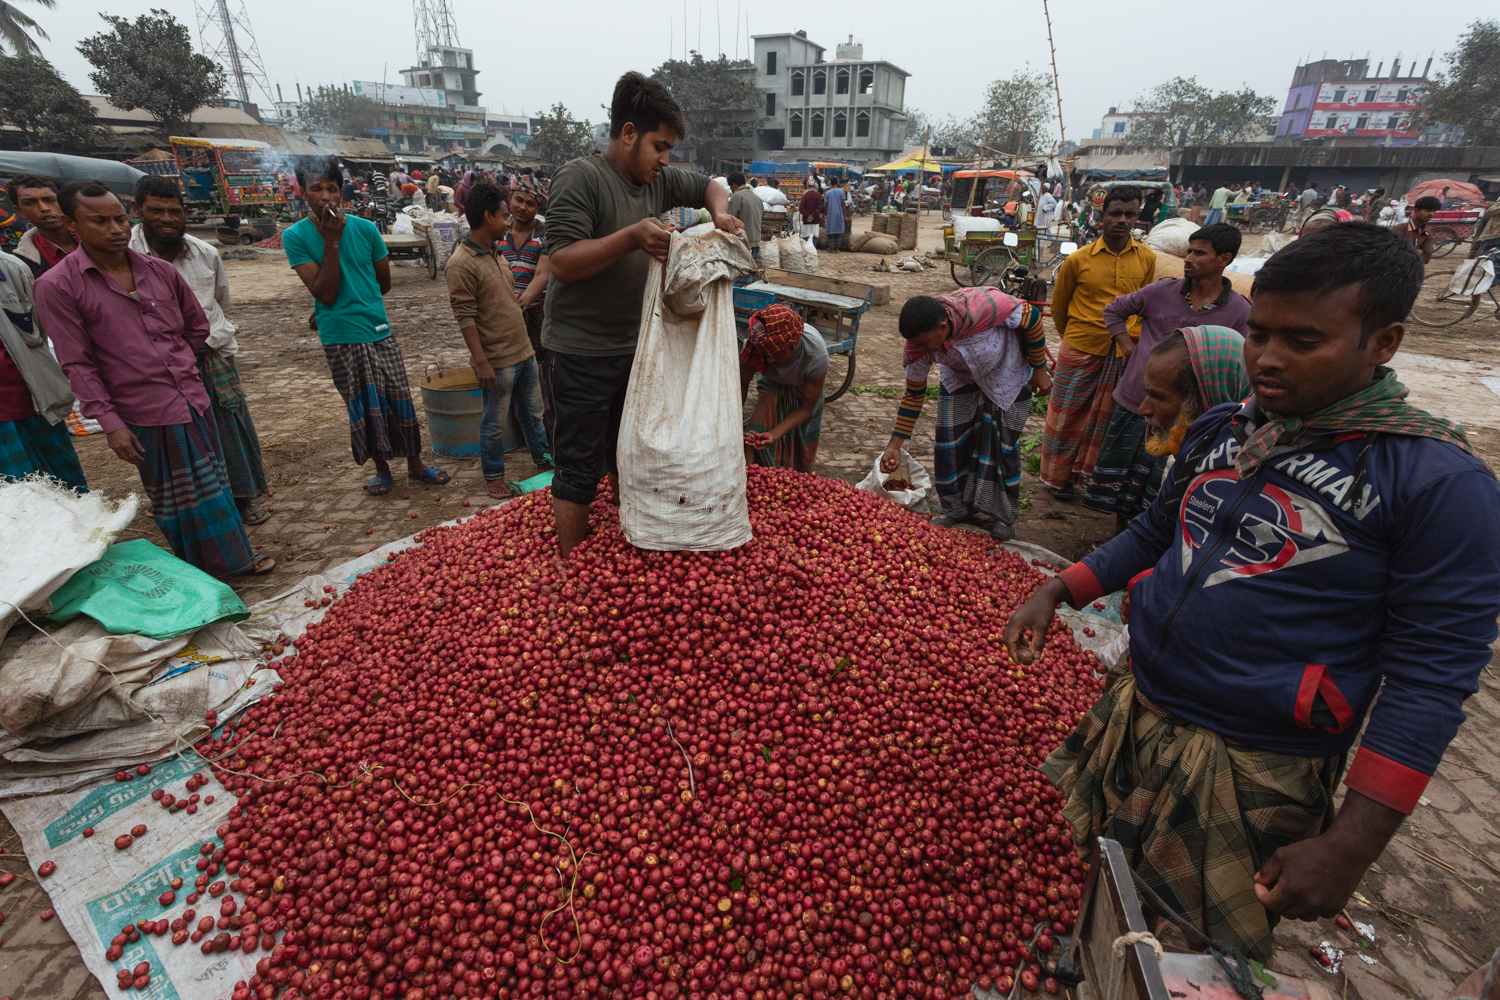 Buyers getting ready to purchase products at the Dhaka, Bangladesh Vegetable Markets.